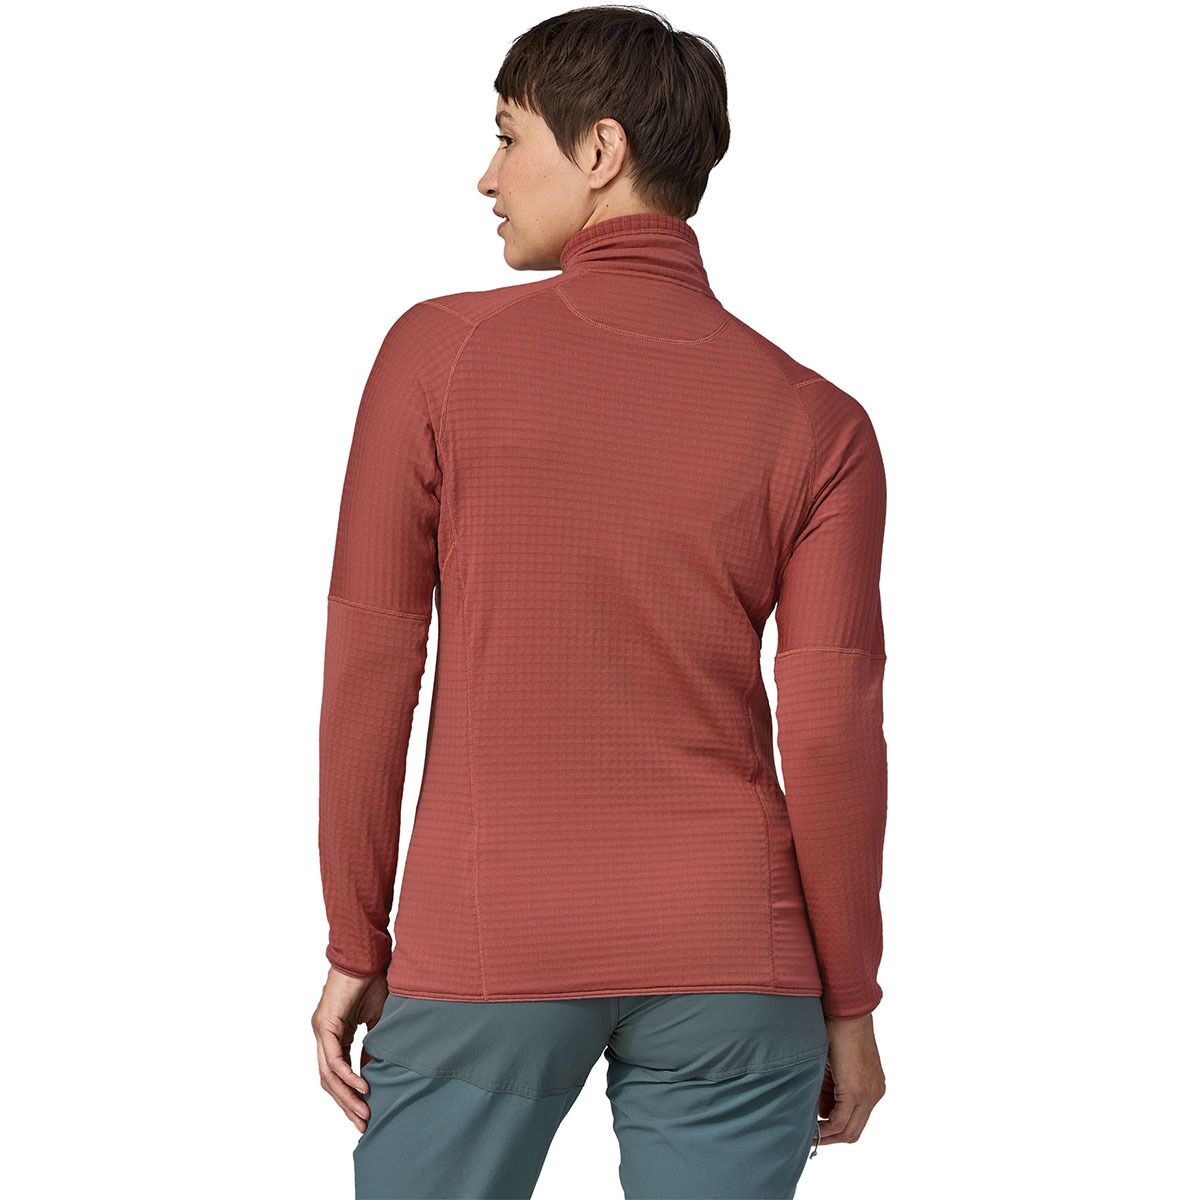 Patagonia R1 Fleece Pullover - Women's - Clothing